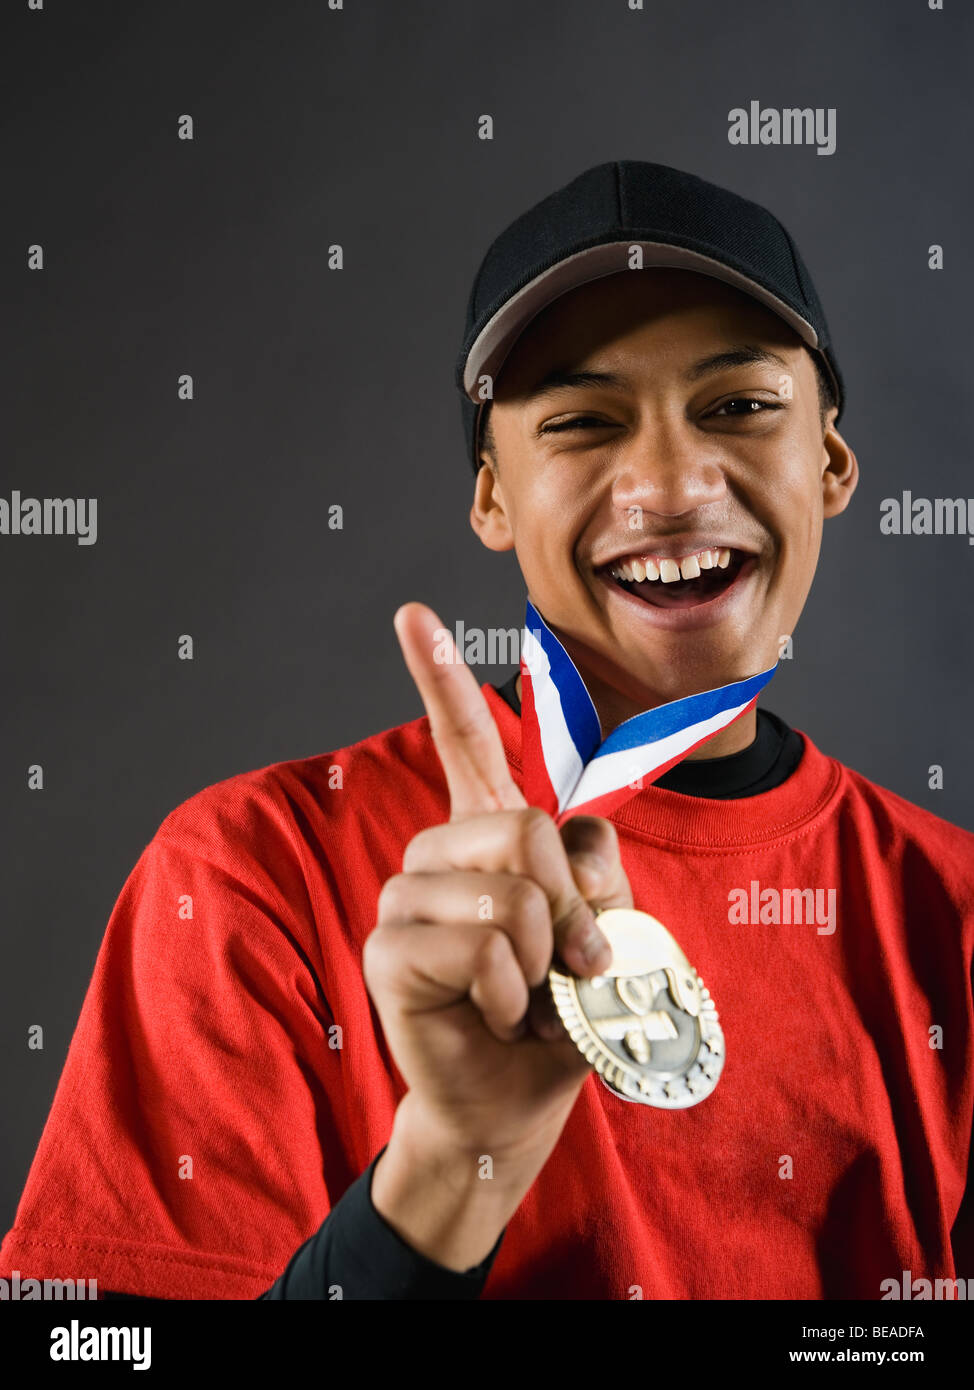 Mixed race baseball player gesturing with award medal Stock Photo